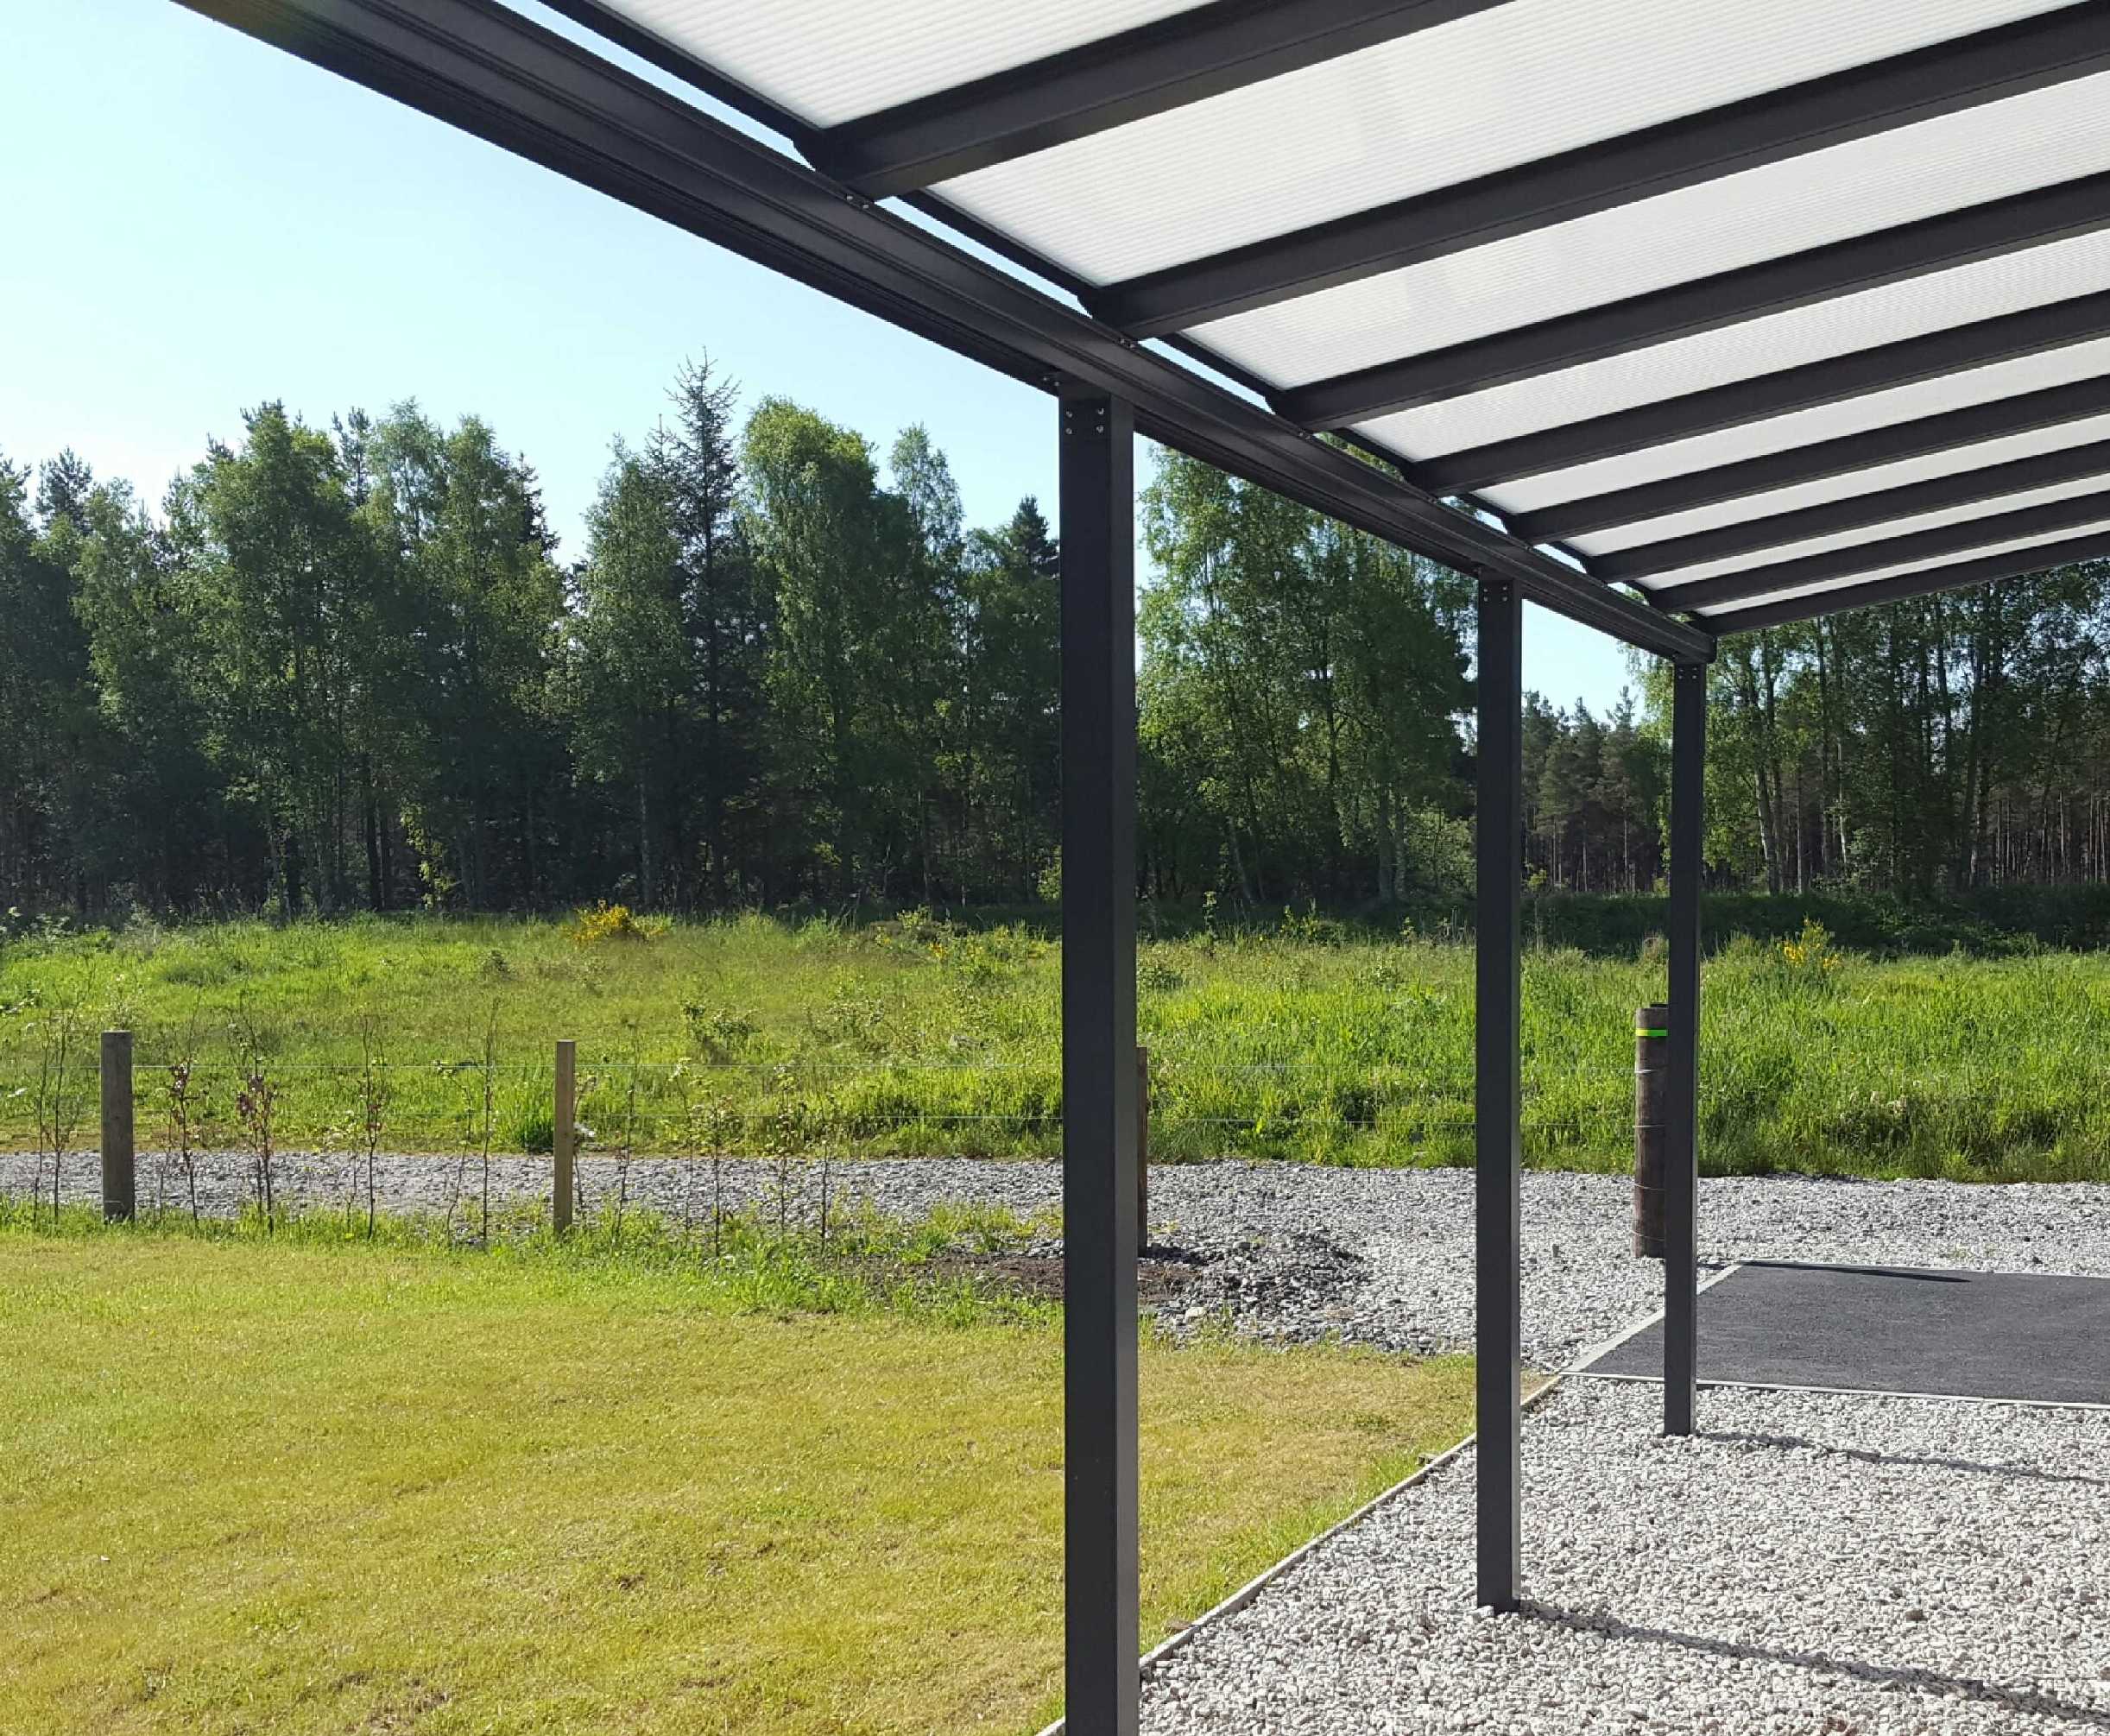 Omega Smart Lean-To Canopy, Anthracite Grey, 6mm Glass Clear Plate Polycarbonate Glazing - 8.4m (W) x 2.5m (P), (4) Supporting Posts